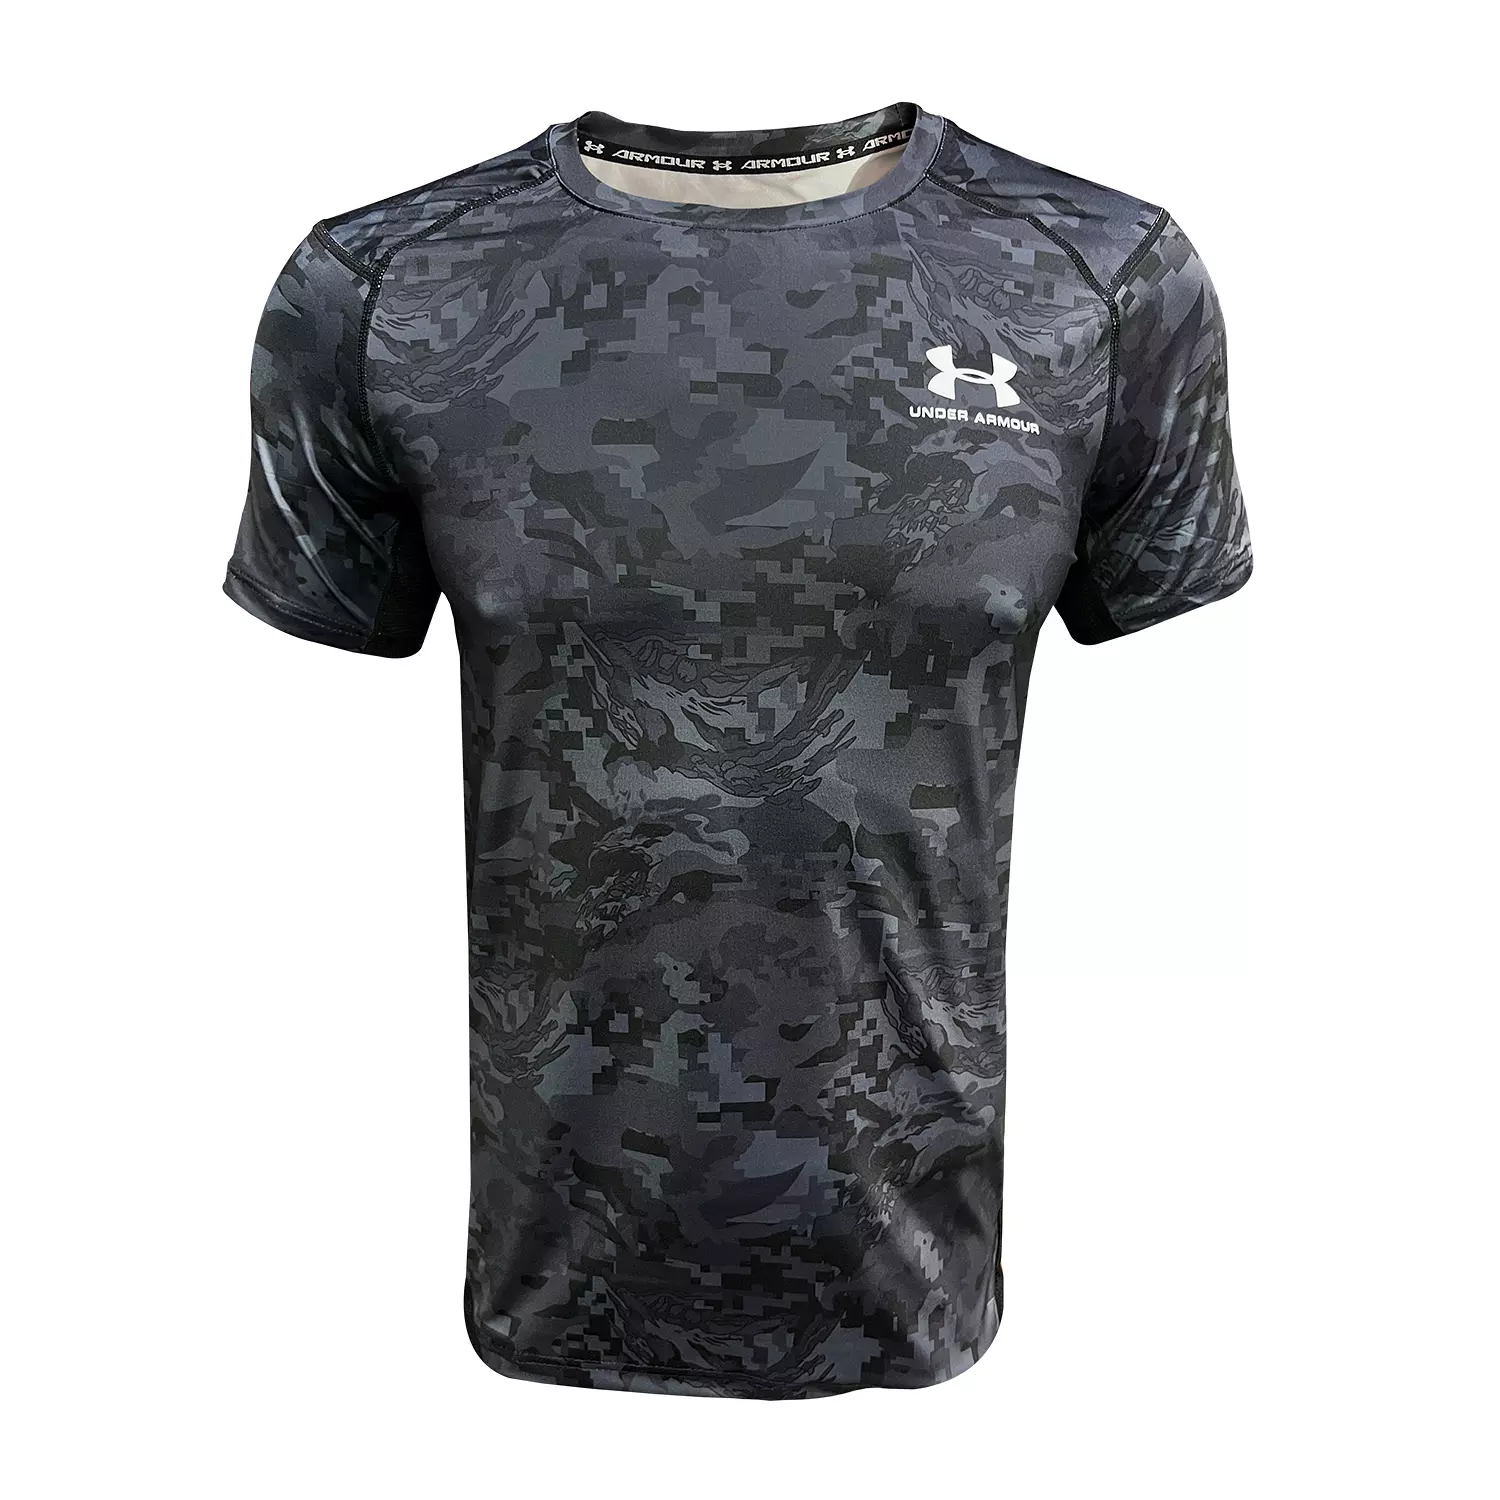 UNDERARMOUR TRAINING T-SHIRT hover image